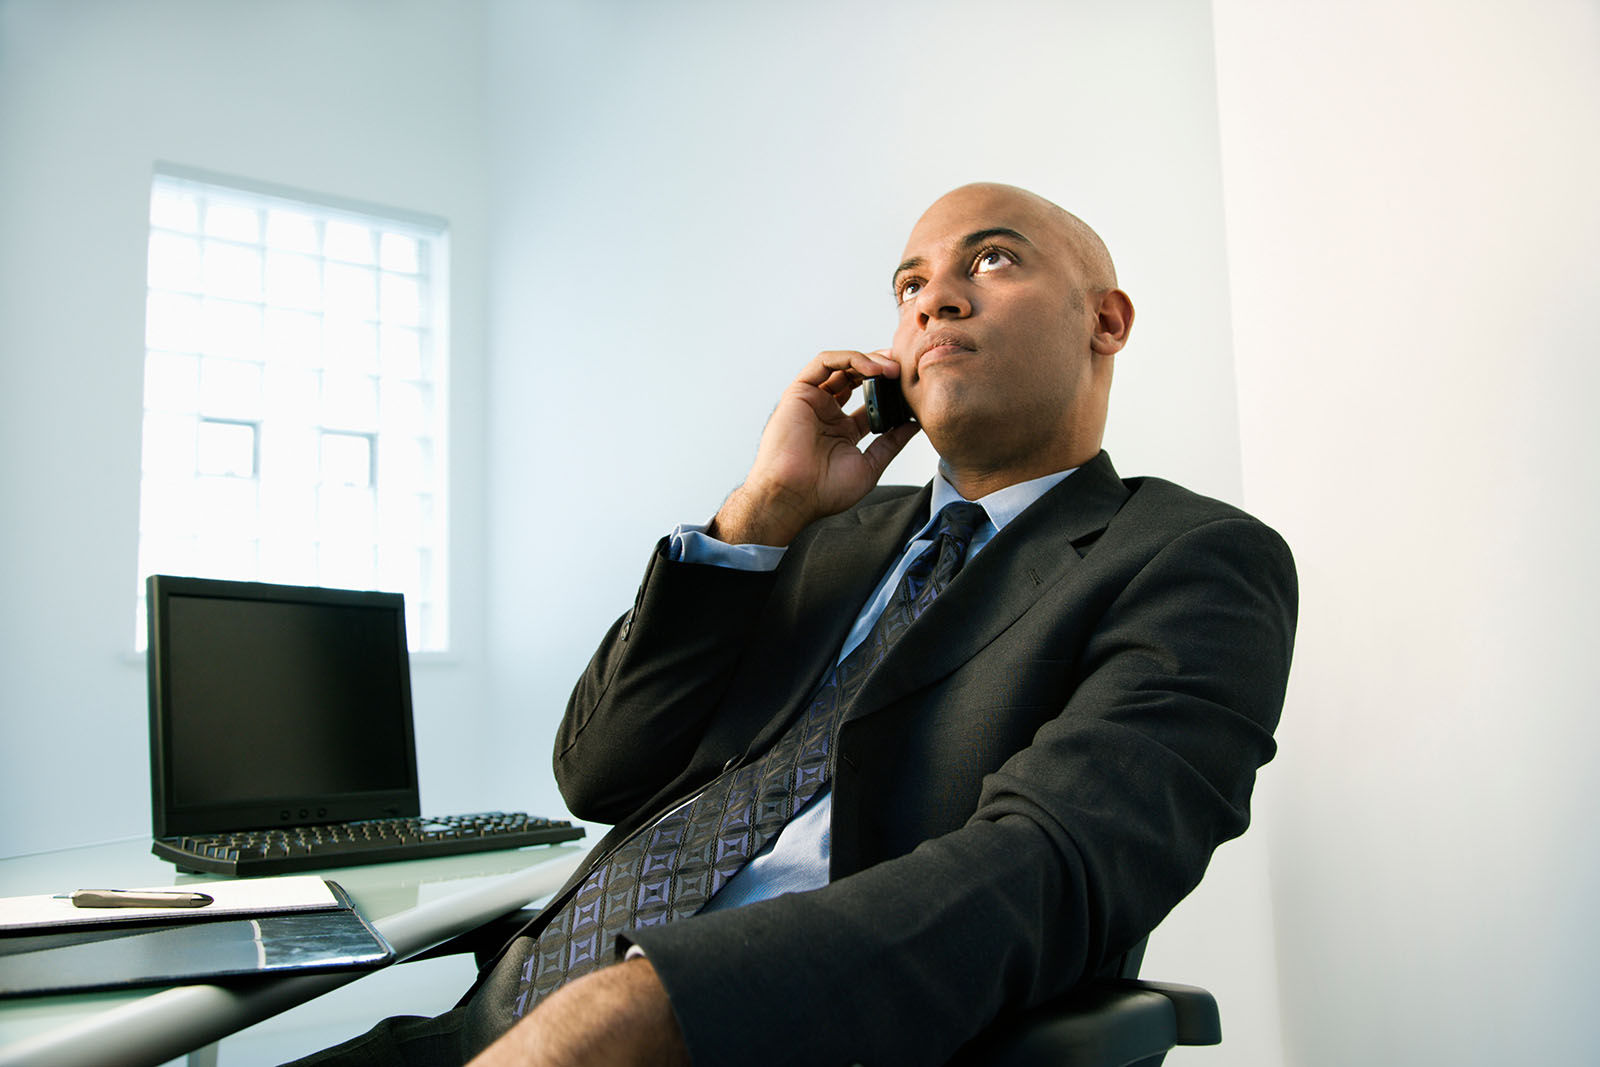 unhappy man waiting on phone in office